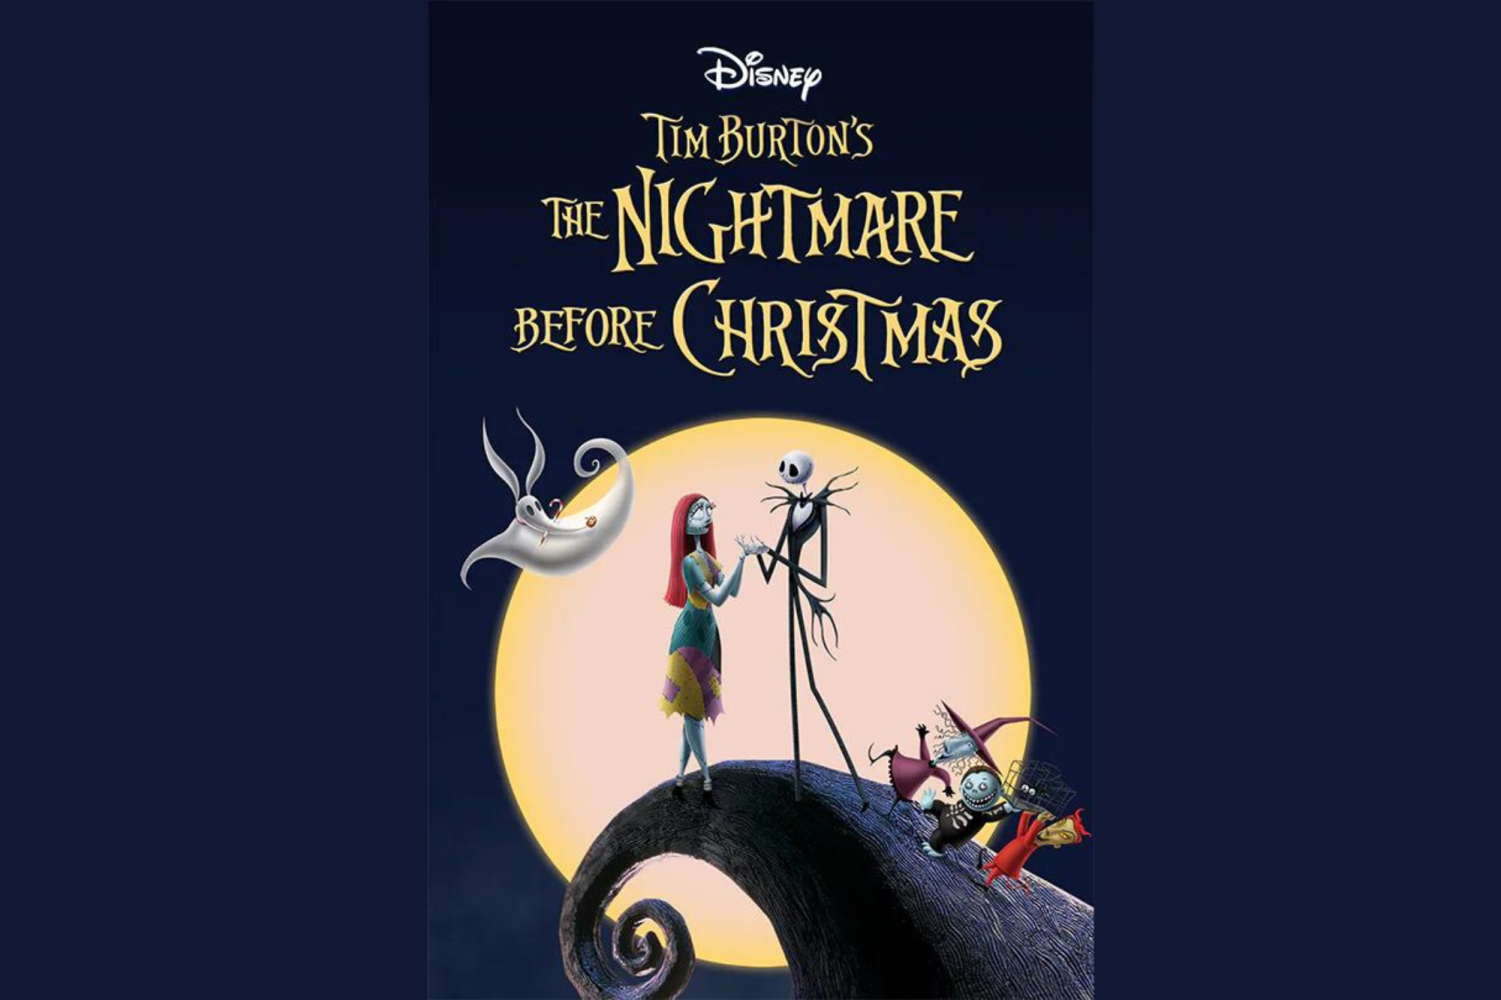 Nightmare Before Christmas' composer: 'It's a Halloween movie